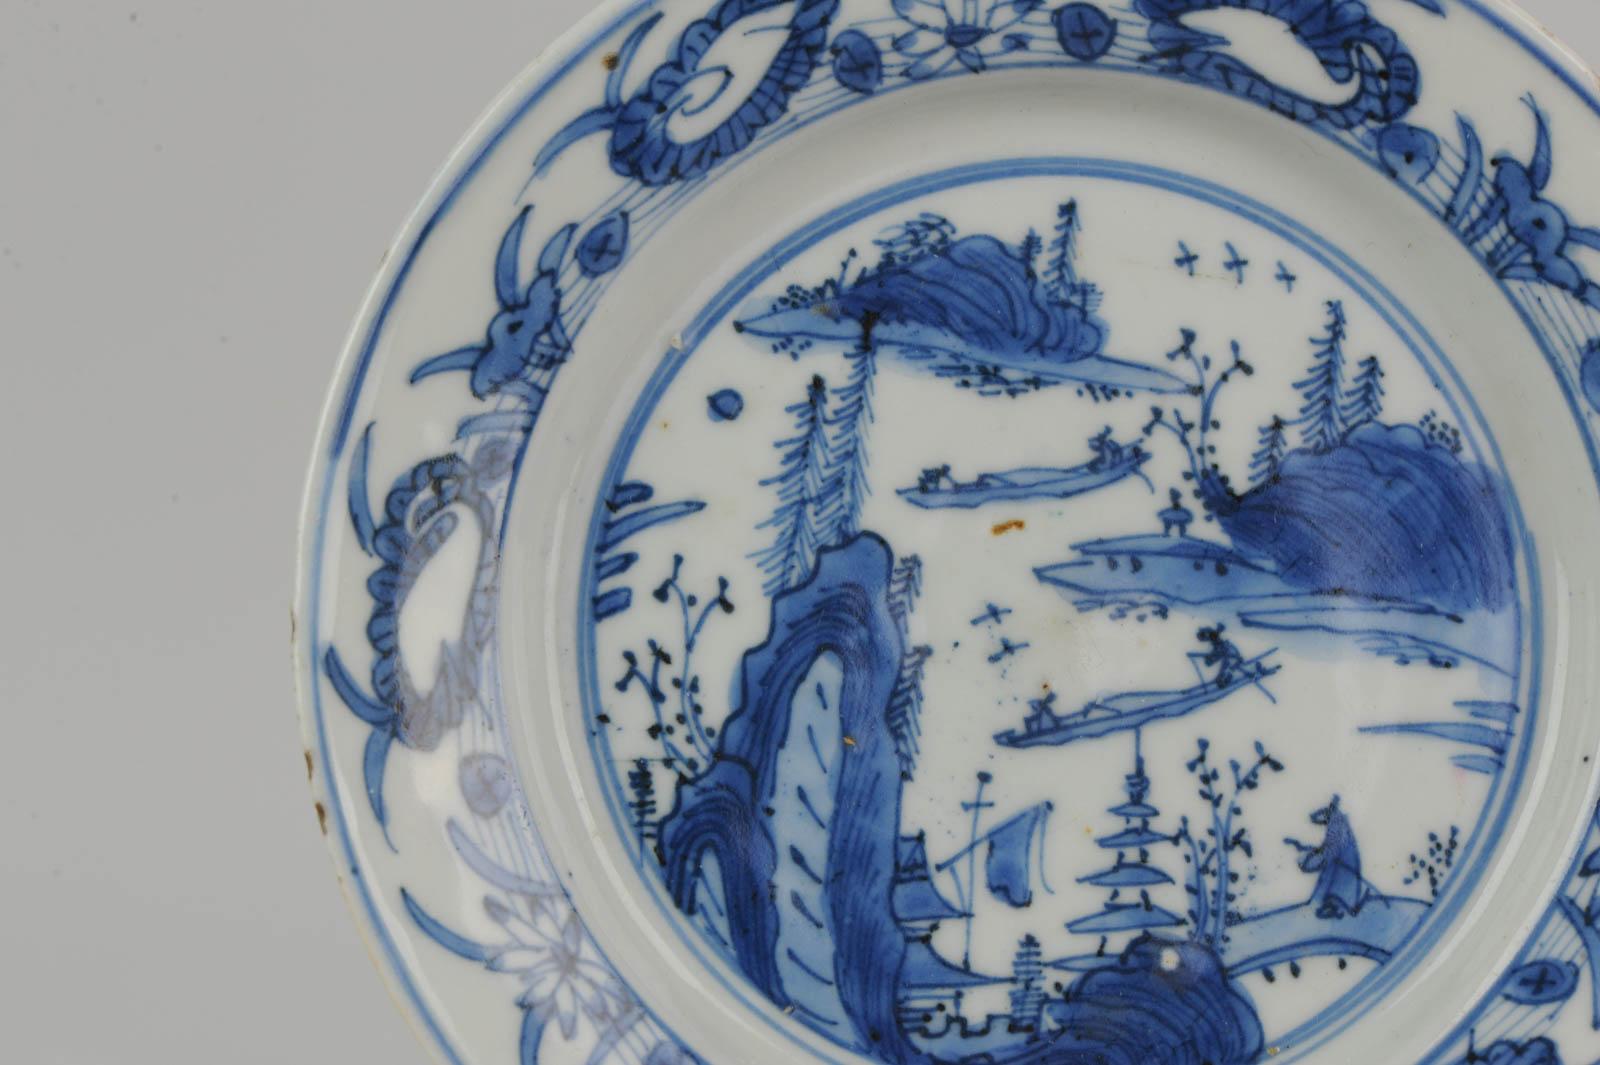 Antique Chinese Porcelain Ming 1540-1580 Jiajing Wanli Landscape Plate with Bird For Sale 6